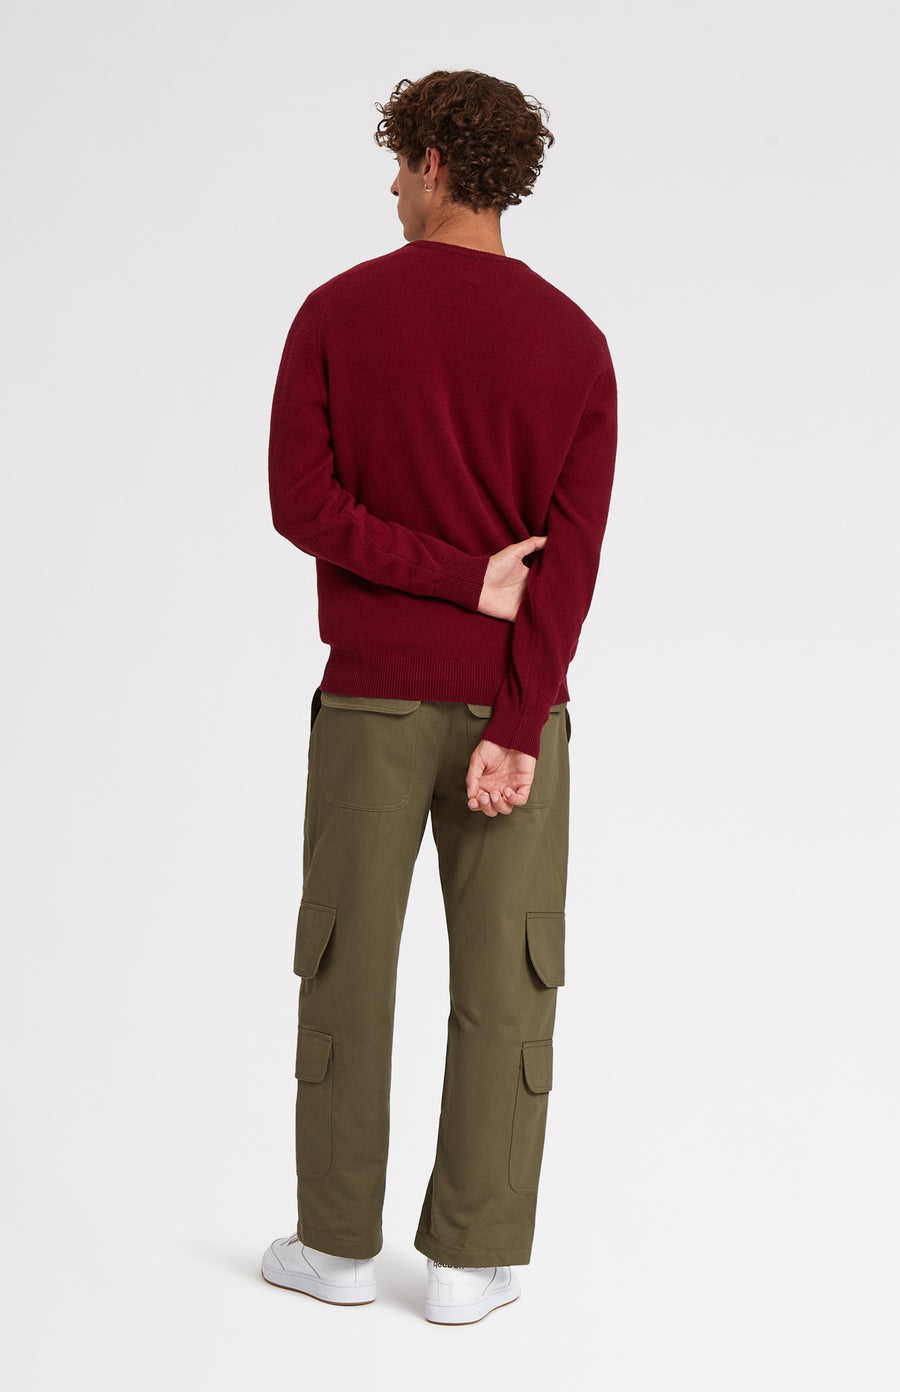 Round Neck Lion Lambswool Jumper In Burgundy rear view - Pringle of Scotland